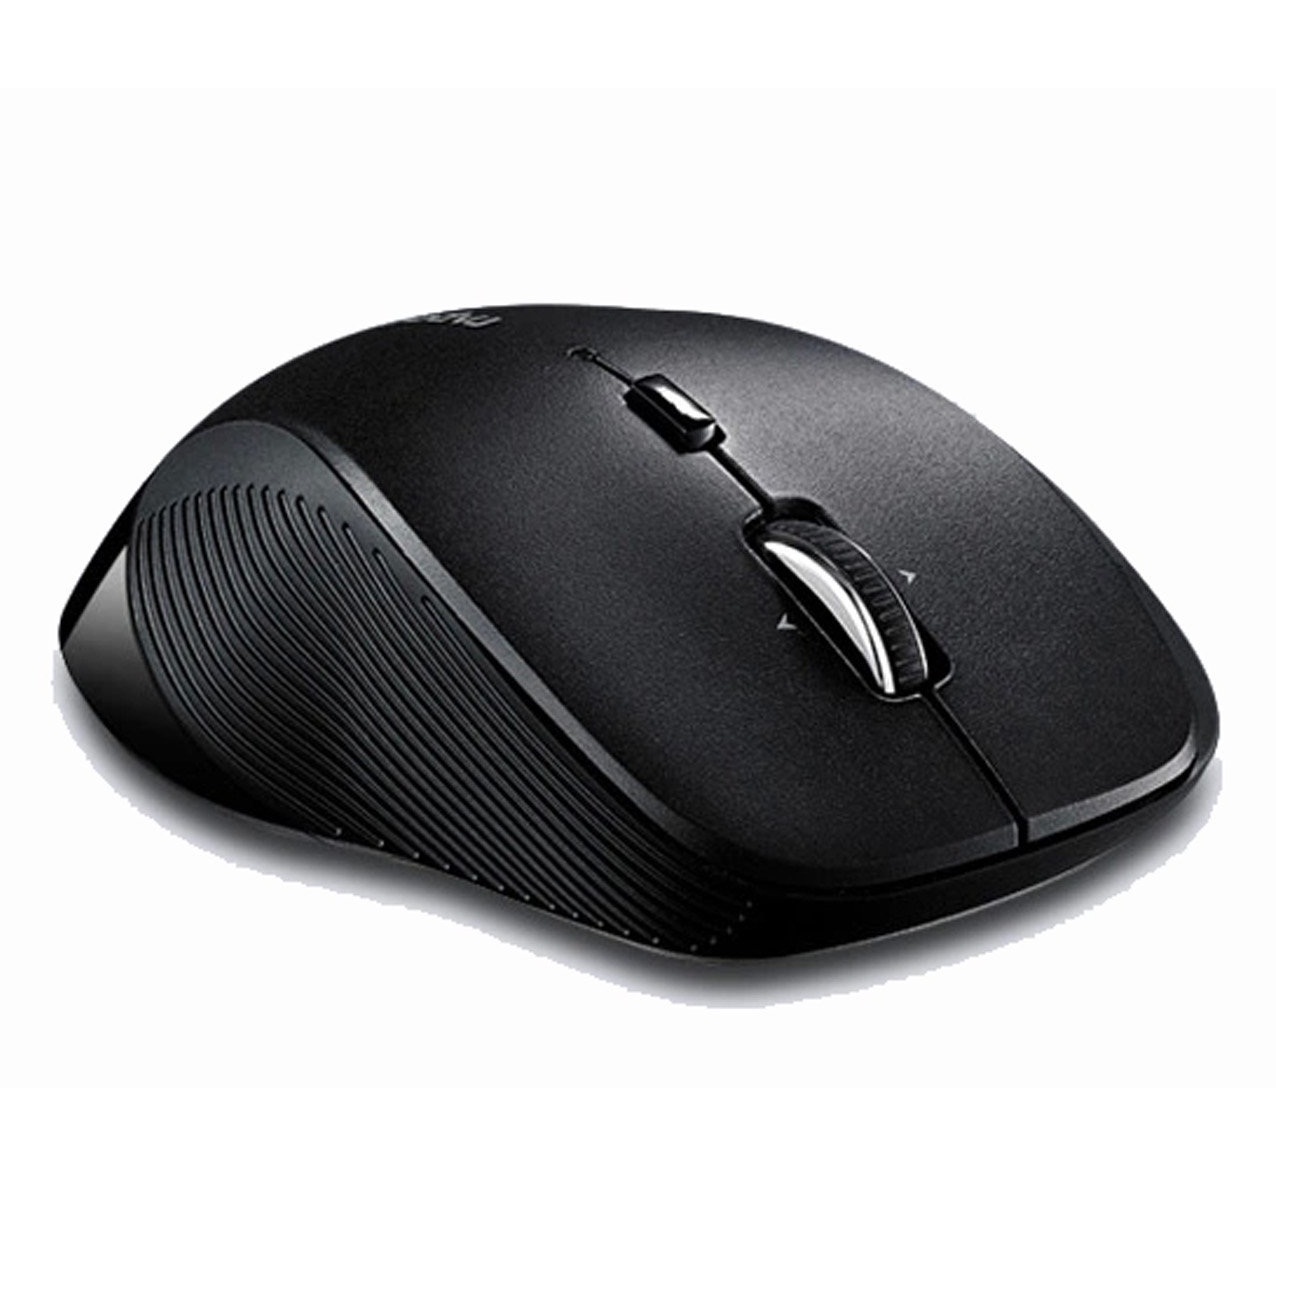 dos usb mouse driver download